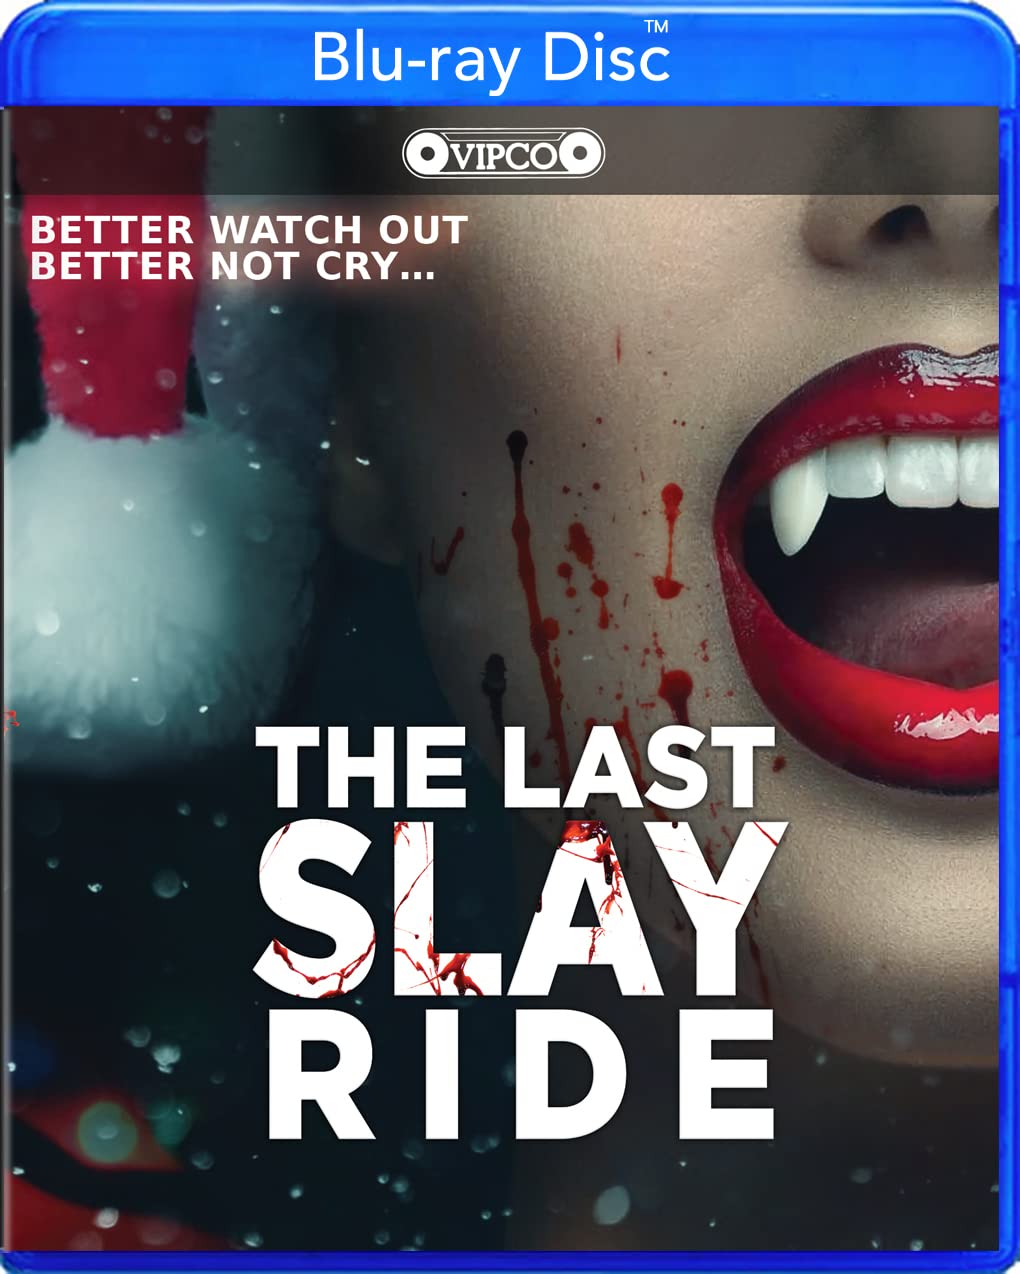 “The Last Slay Ride” Blu-ray comes out Dec 13 from